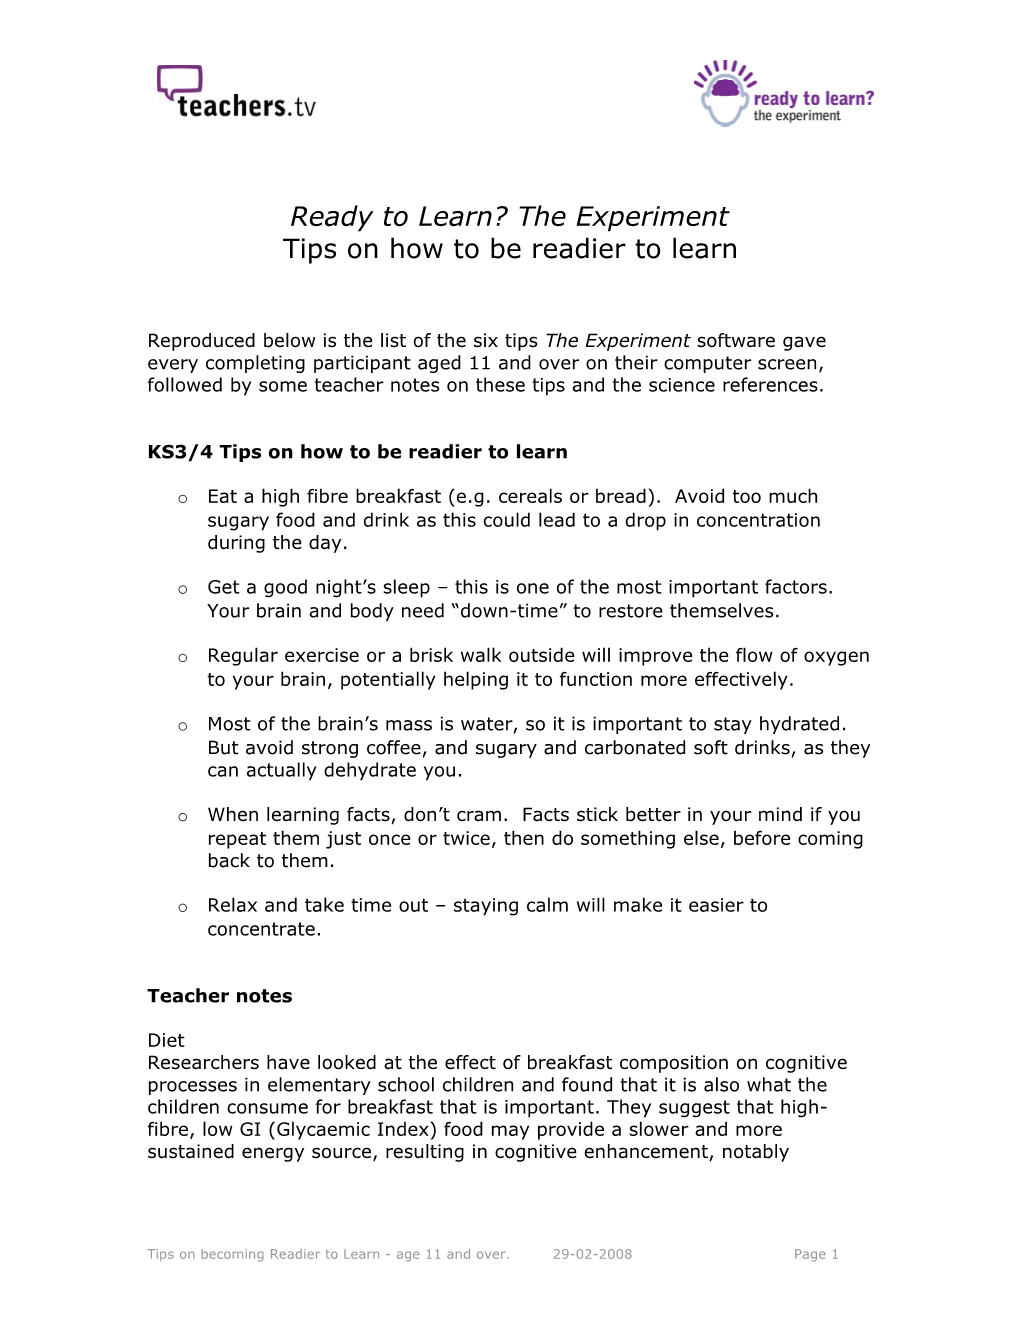 Ready to Learn? the Experiment